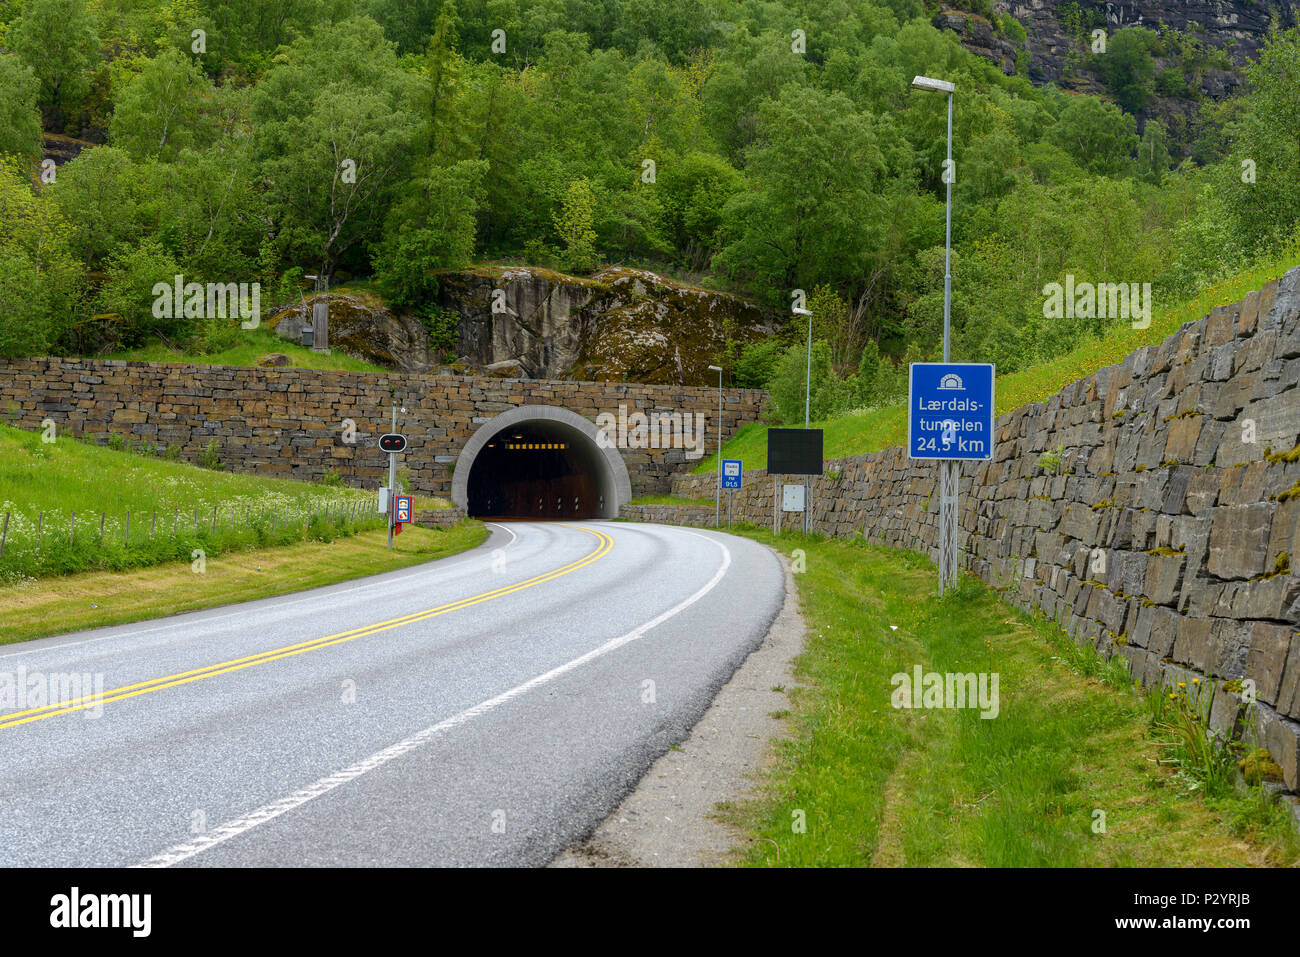 Laerdal Tunnel in Norway - the longest road tunnel in the world, it's 24.5 KM long. Stock Photo